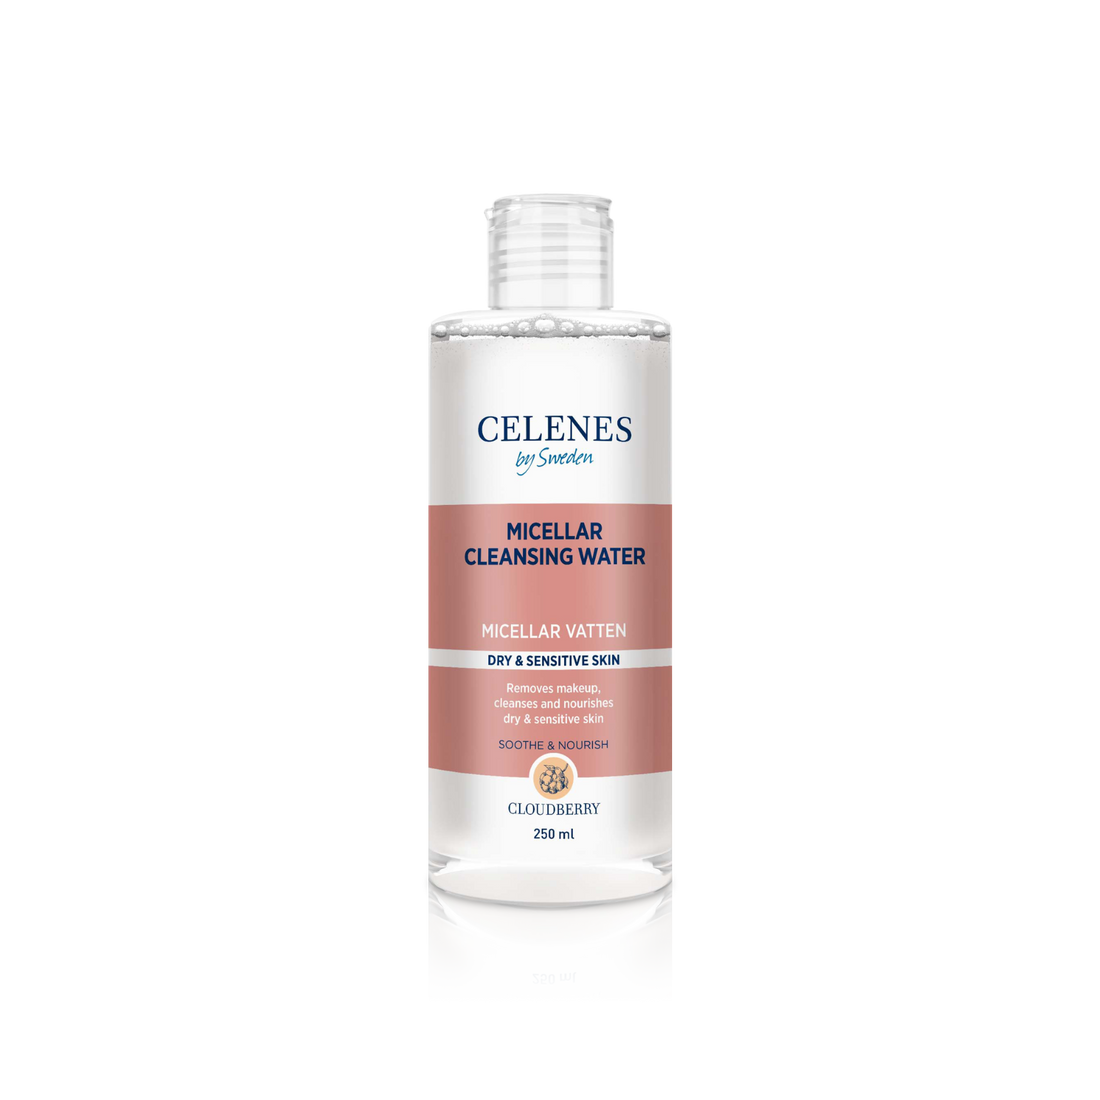 Cloudberry Micellar Cleansing Water